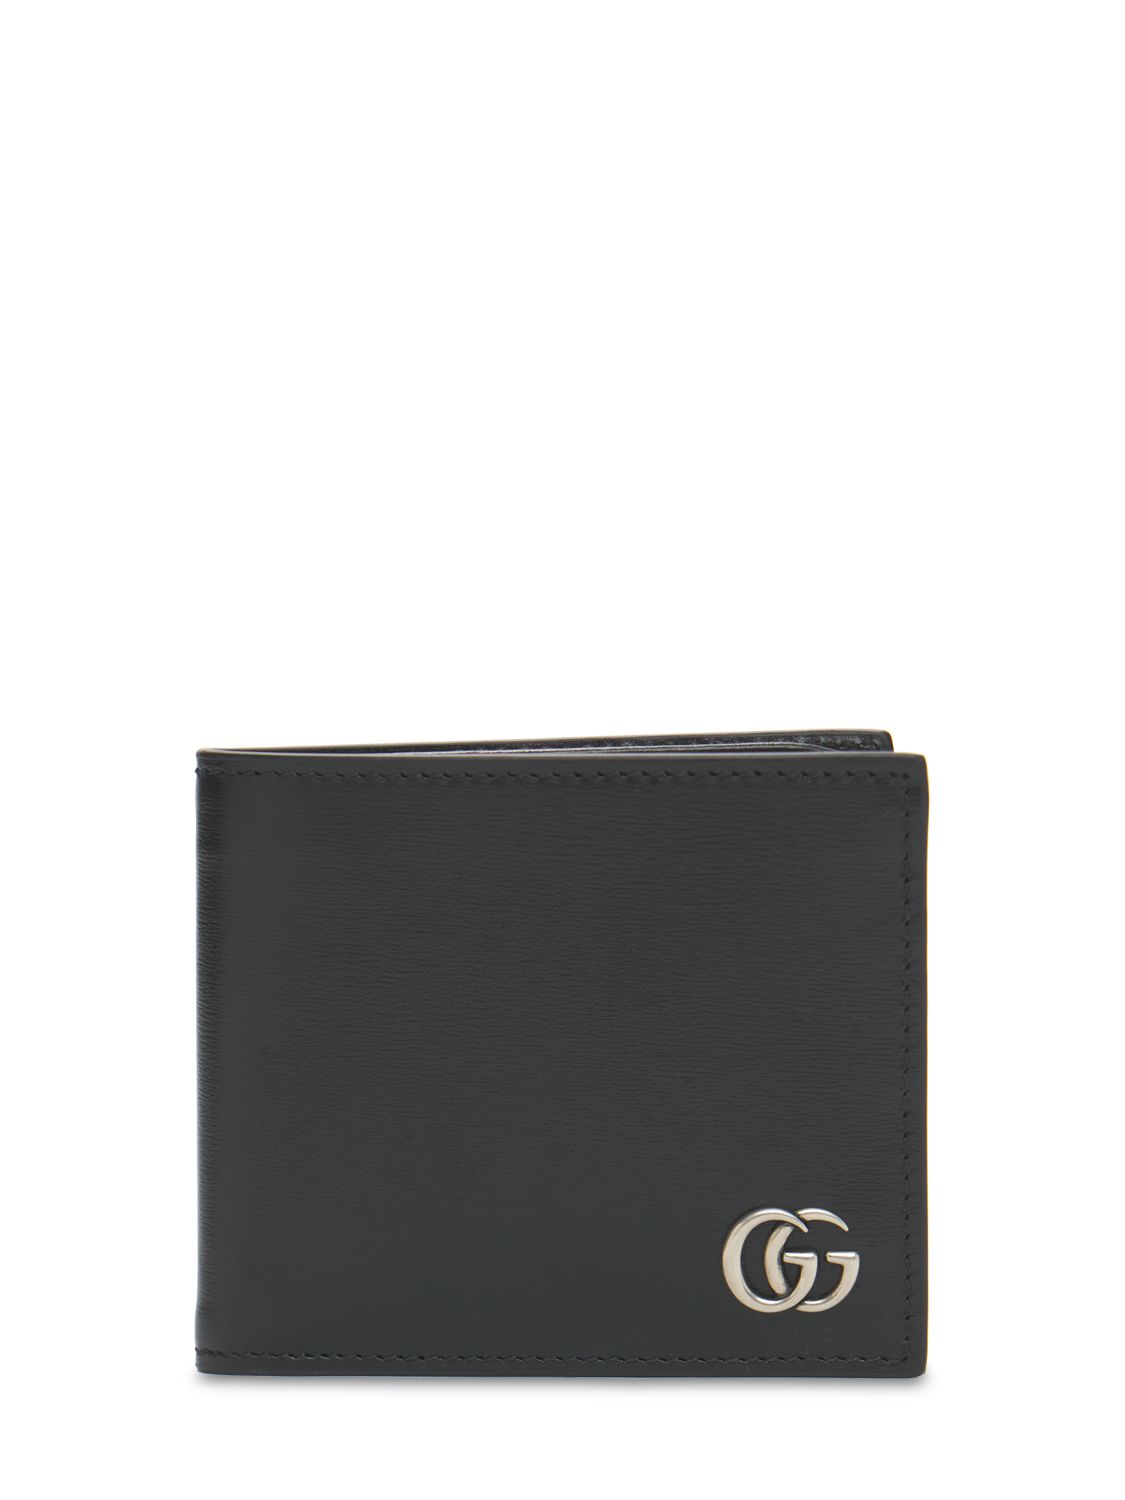 Gg Marmont Leather Classic Wallet